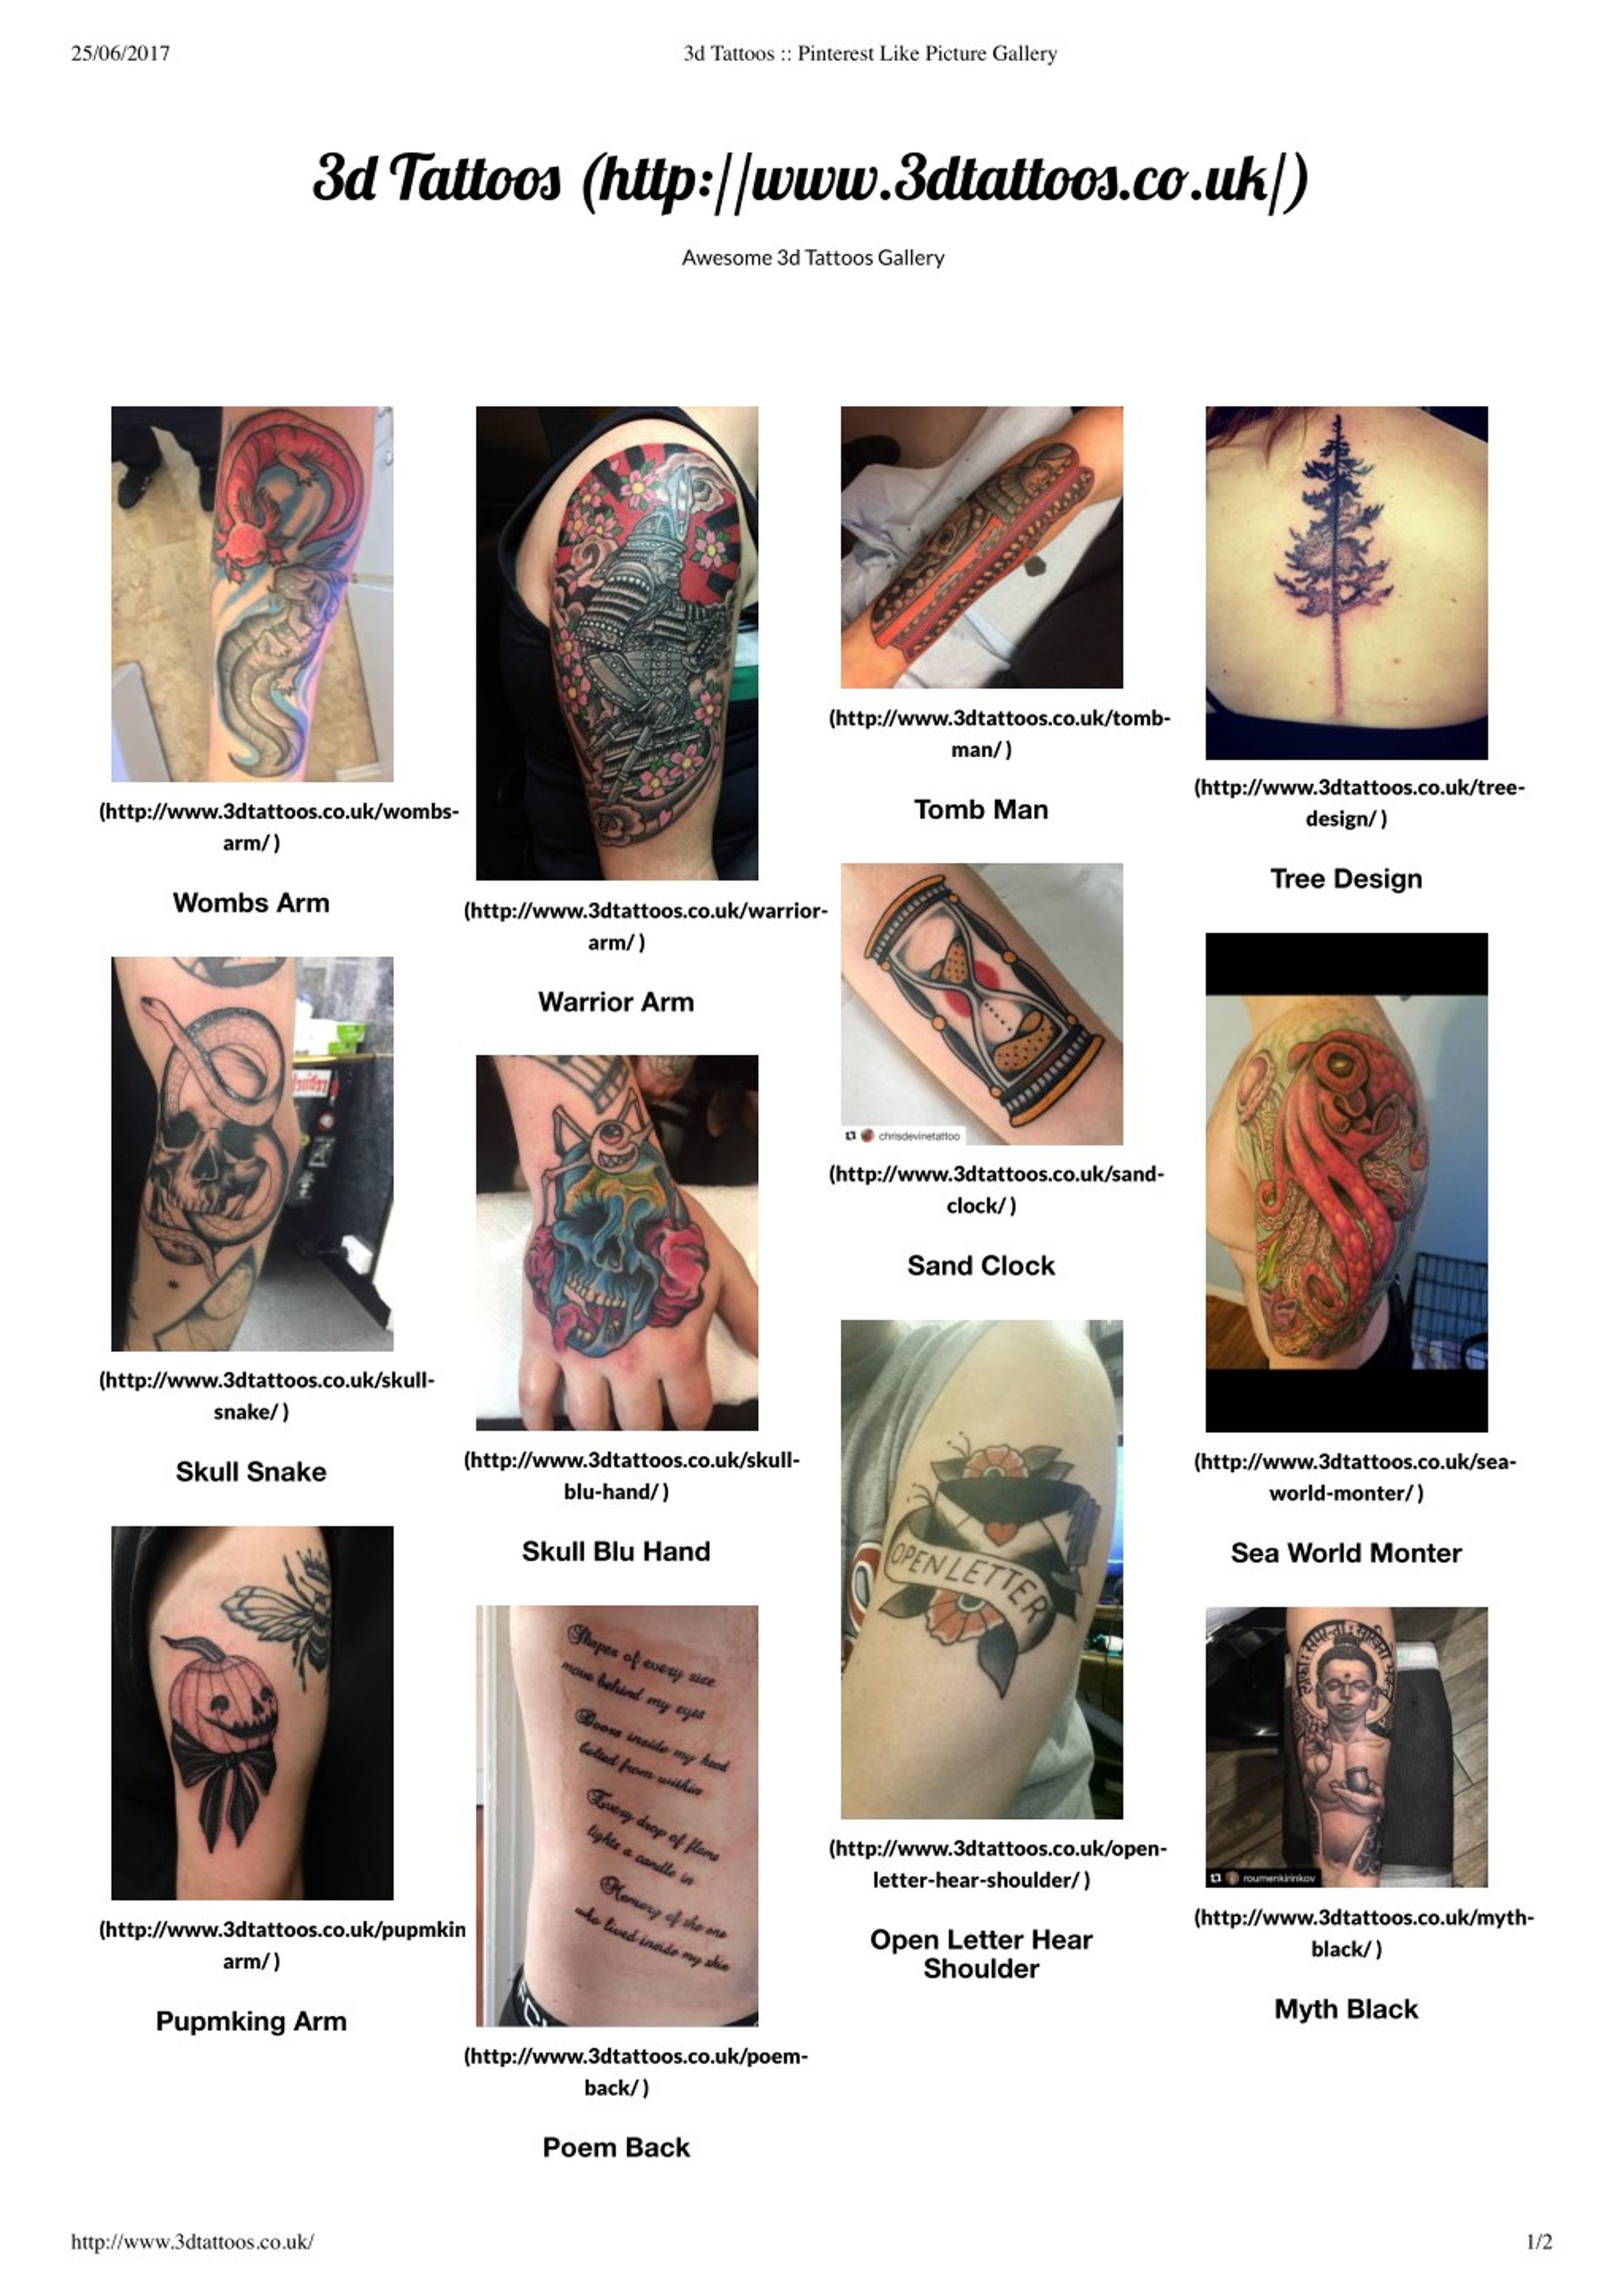 31 Extraordinary Tattoo Designs For Girls [FAQs Included]